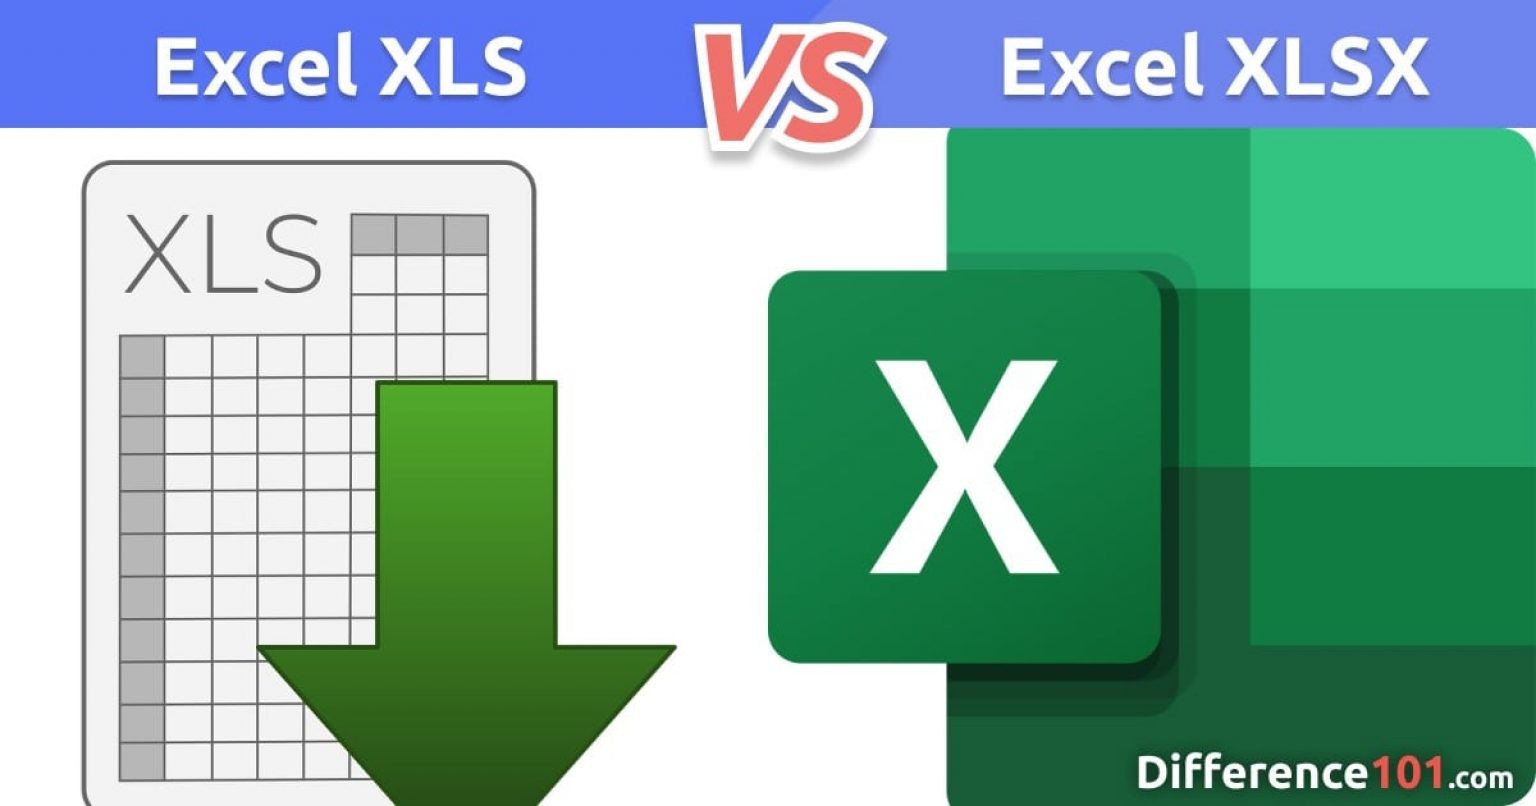 Xls Vs Xlsx Key Differences Pros And Cons ~ Difference 101 4233